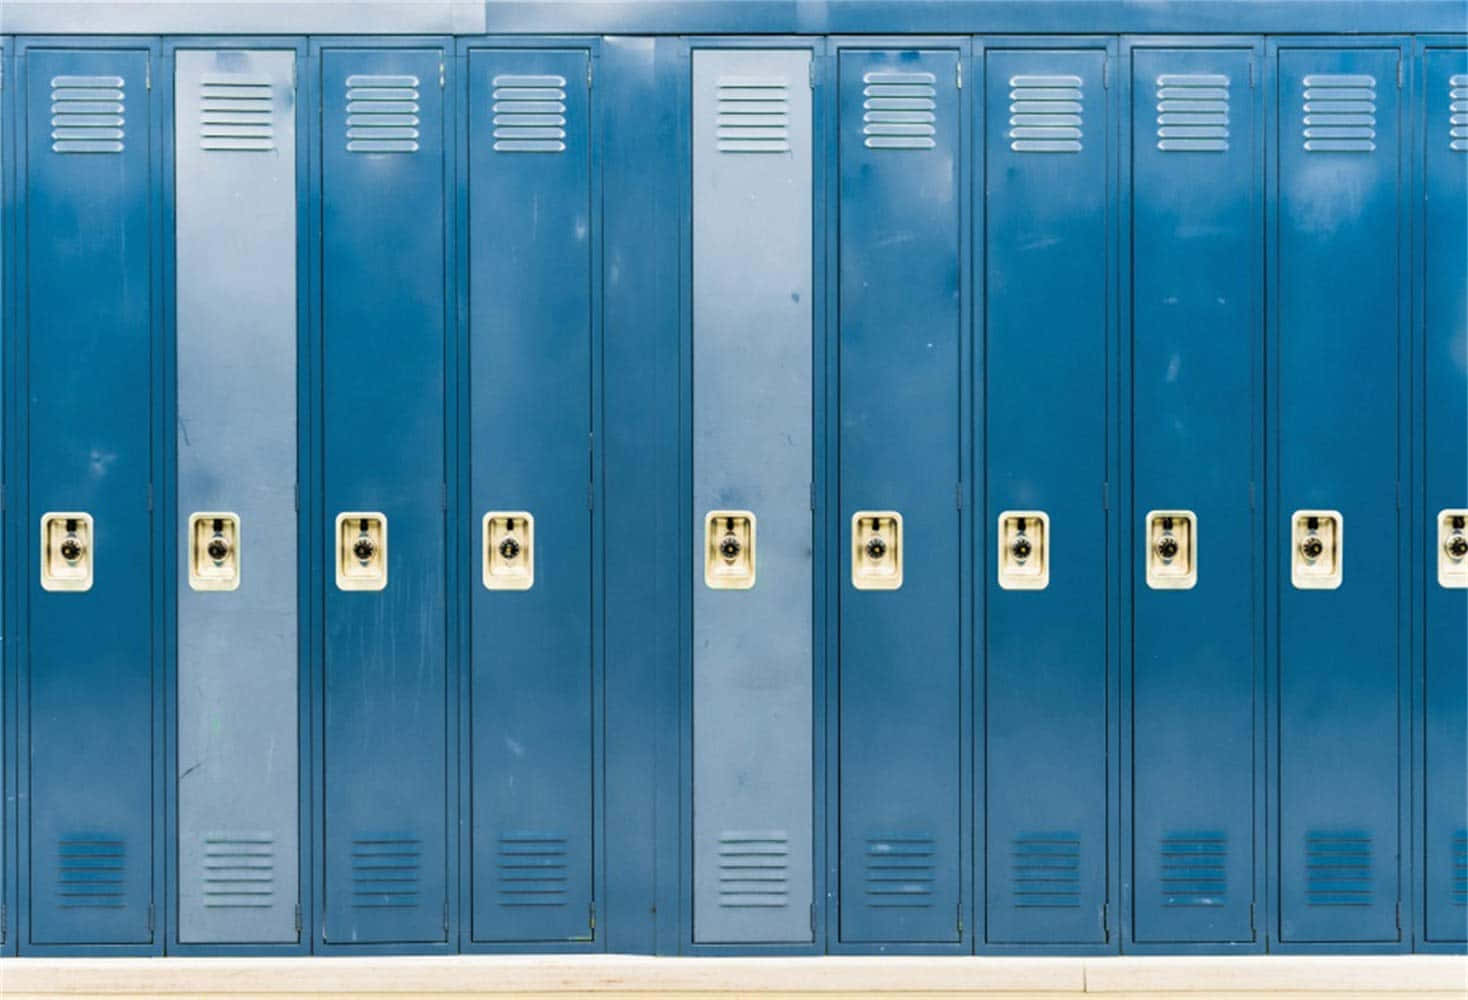 Keep your valuables safe with a locker